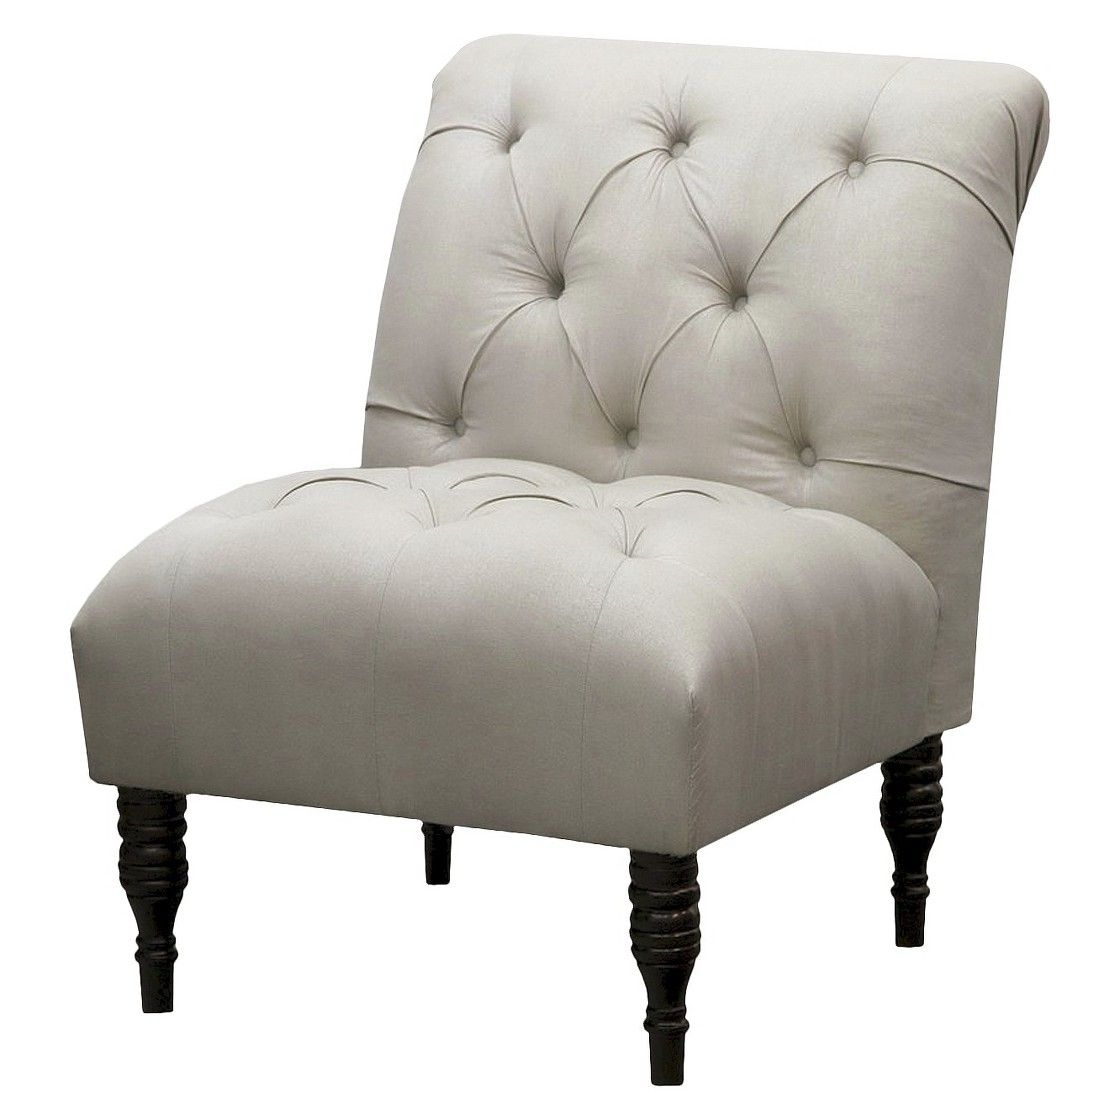 Small upholstered armchair 5